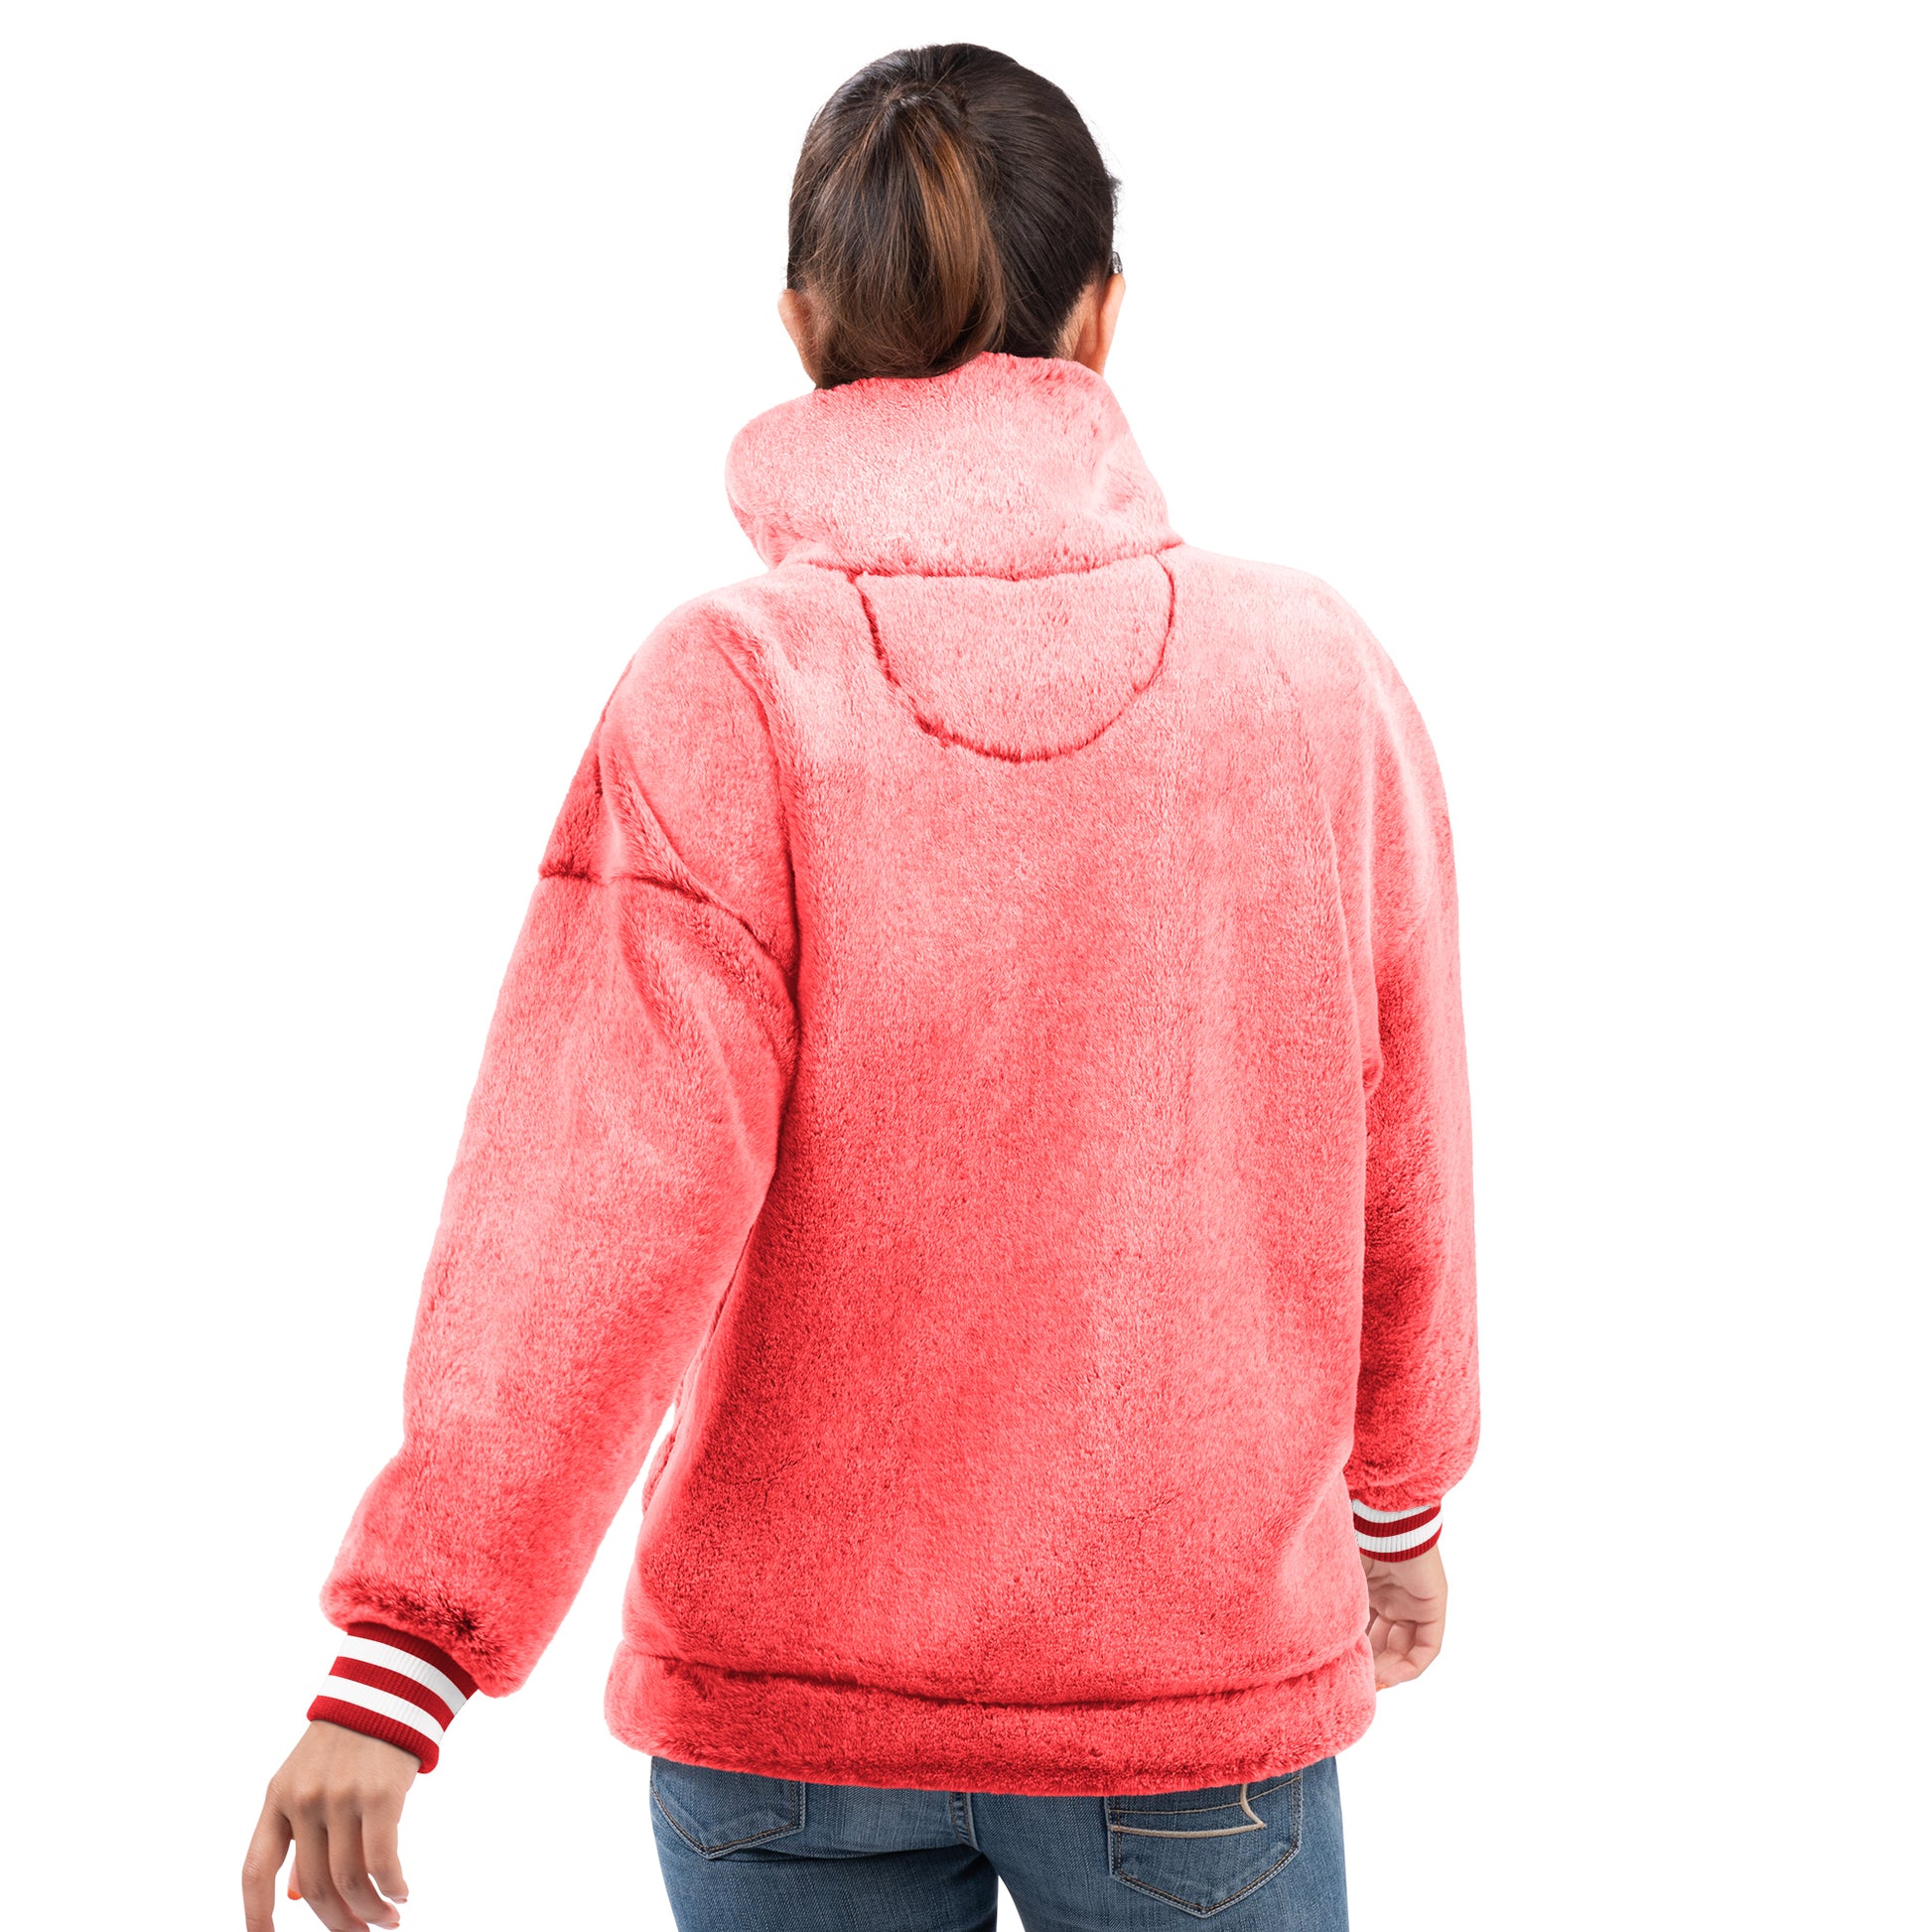 Back: Fluffy red quarter zip with cuffed wrists featuring 2 white stripes